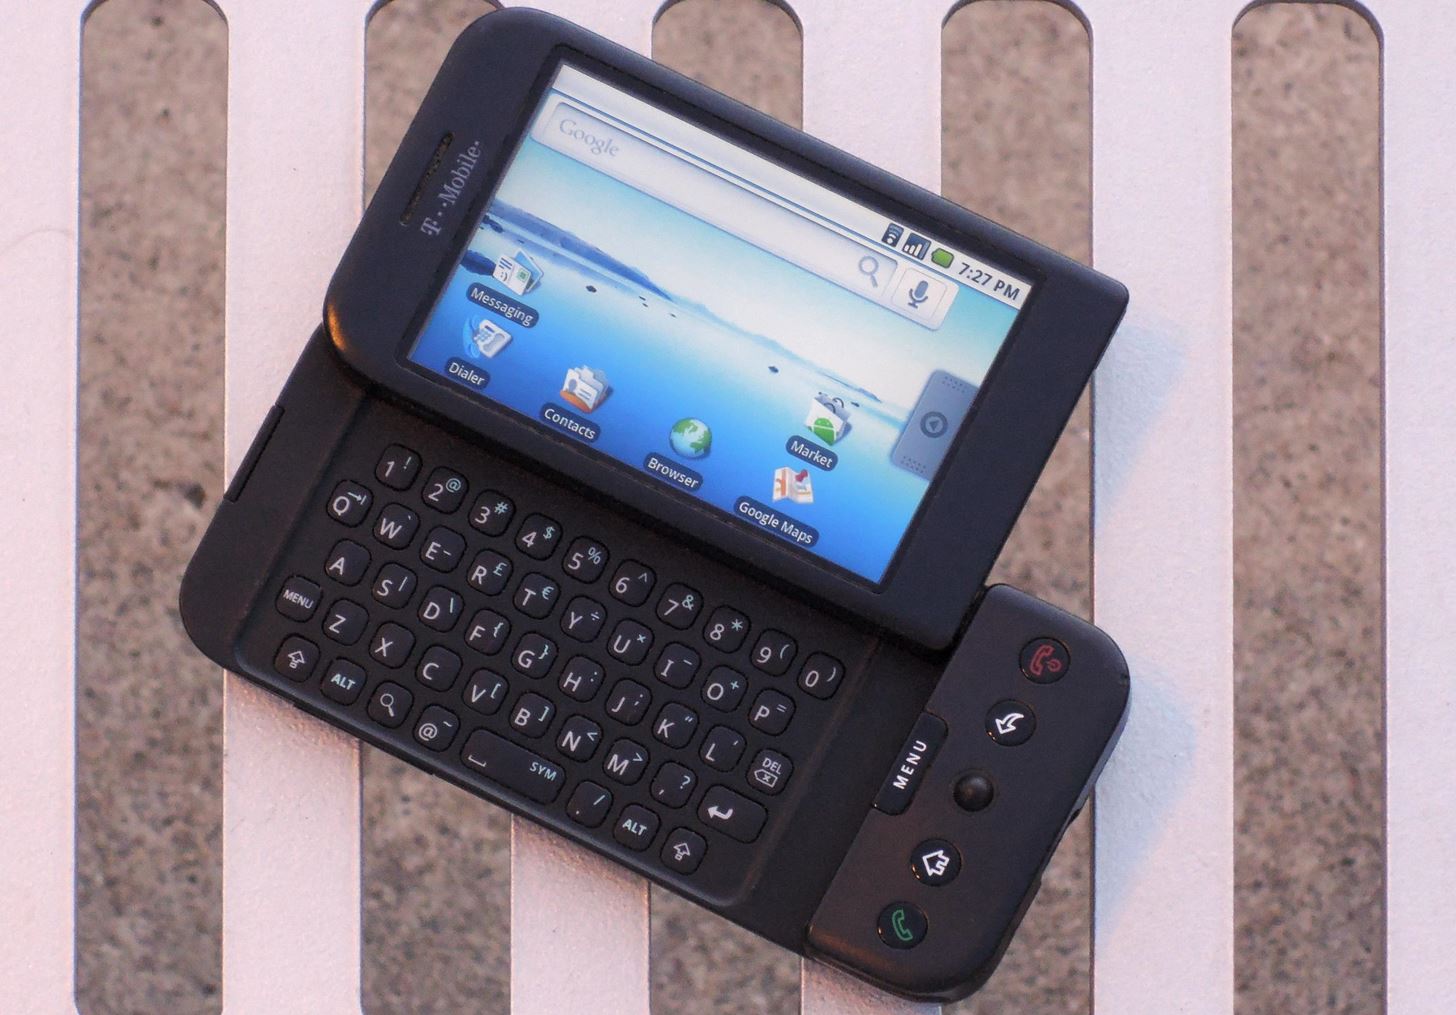 The Aboriginal Android Phone Debuted 10 Years Ago This Month — What a Aberration a Decade Makes